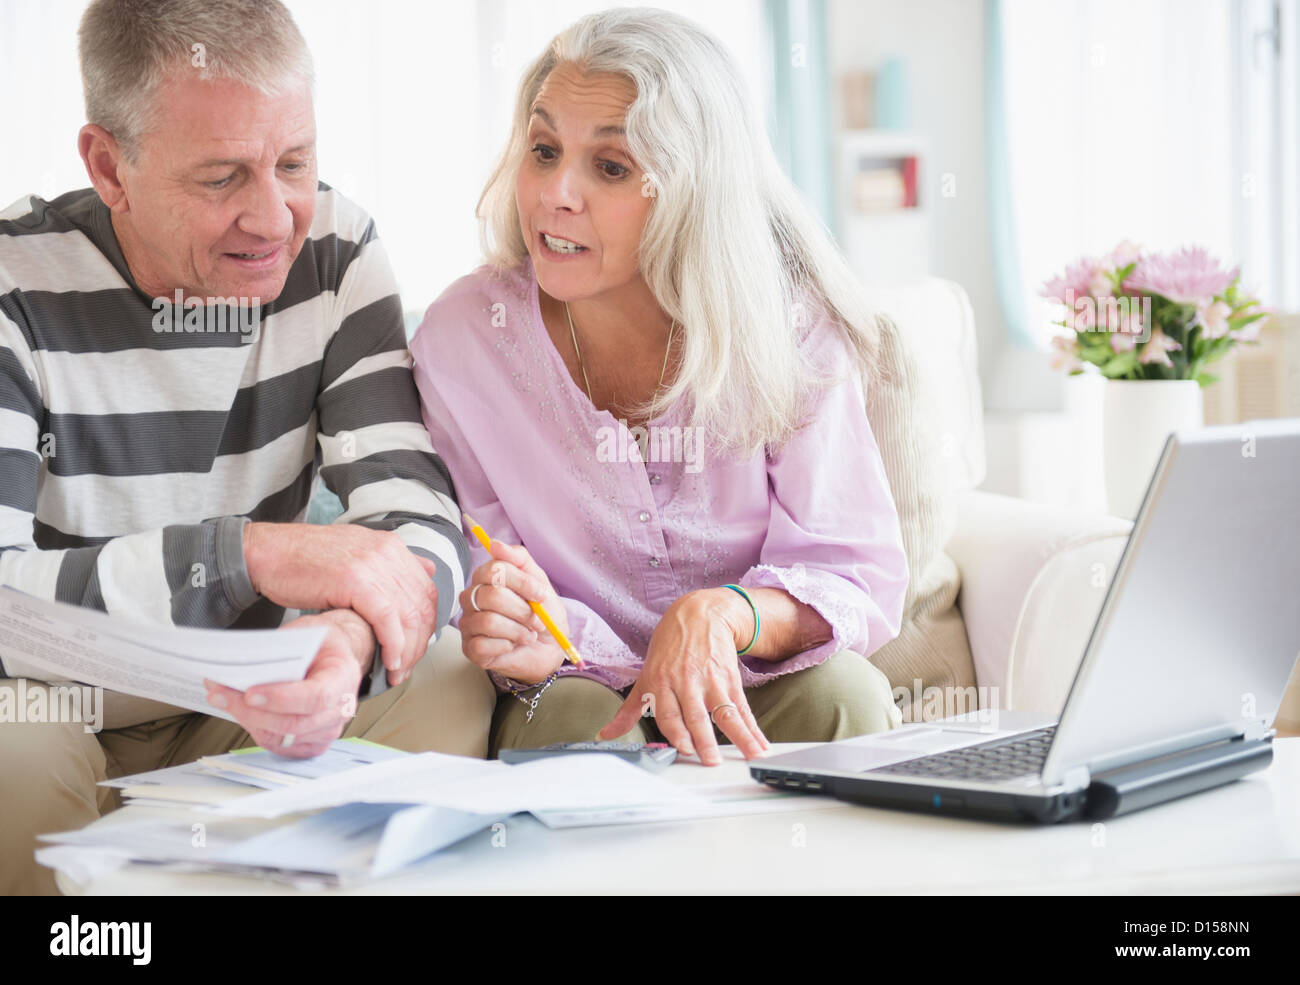 USA, New Jersey, Jersey City, Elderly couple with laptop and documents sitting in living room Stock Photo